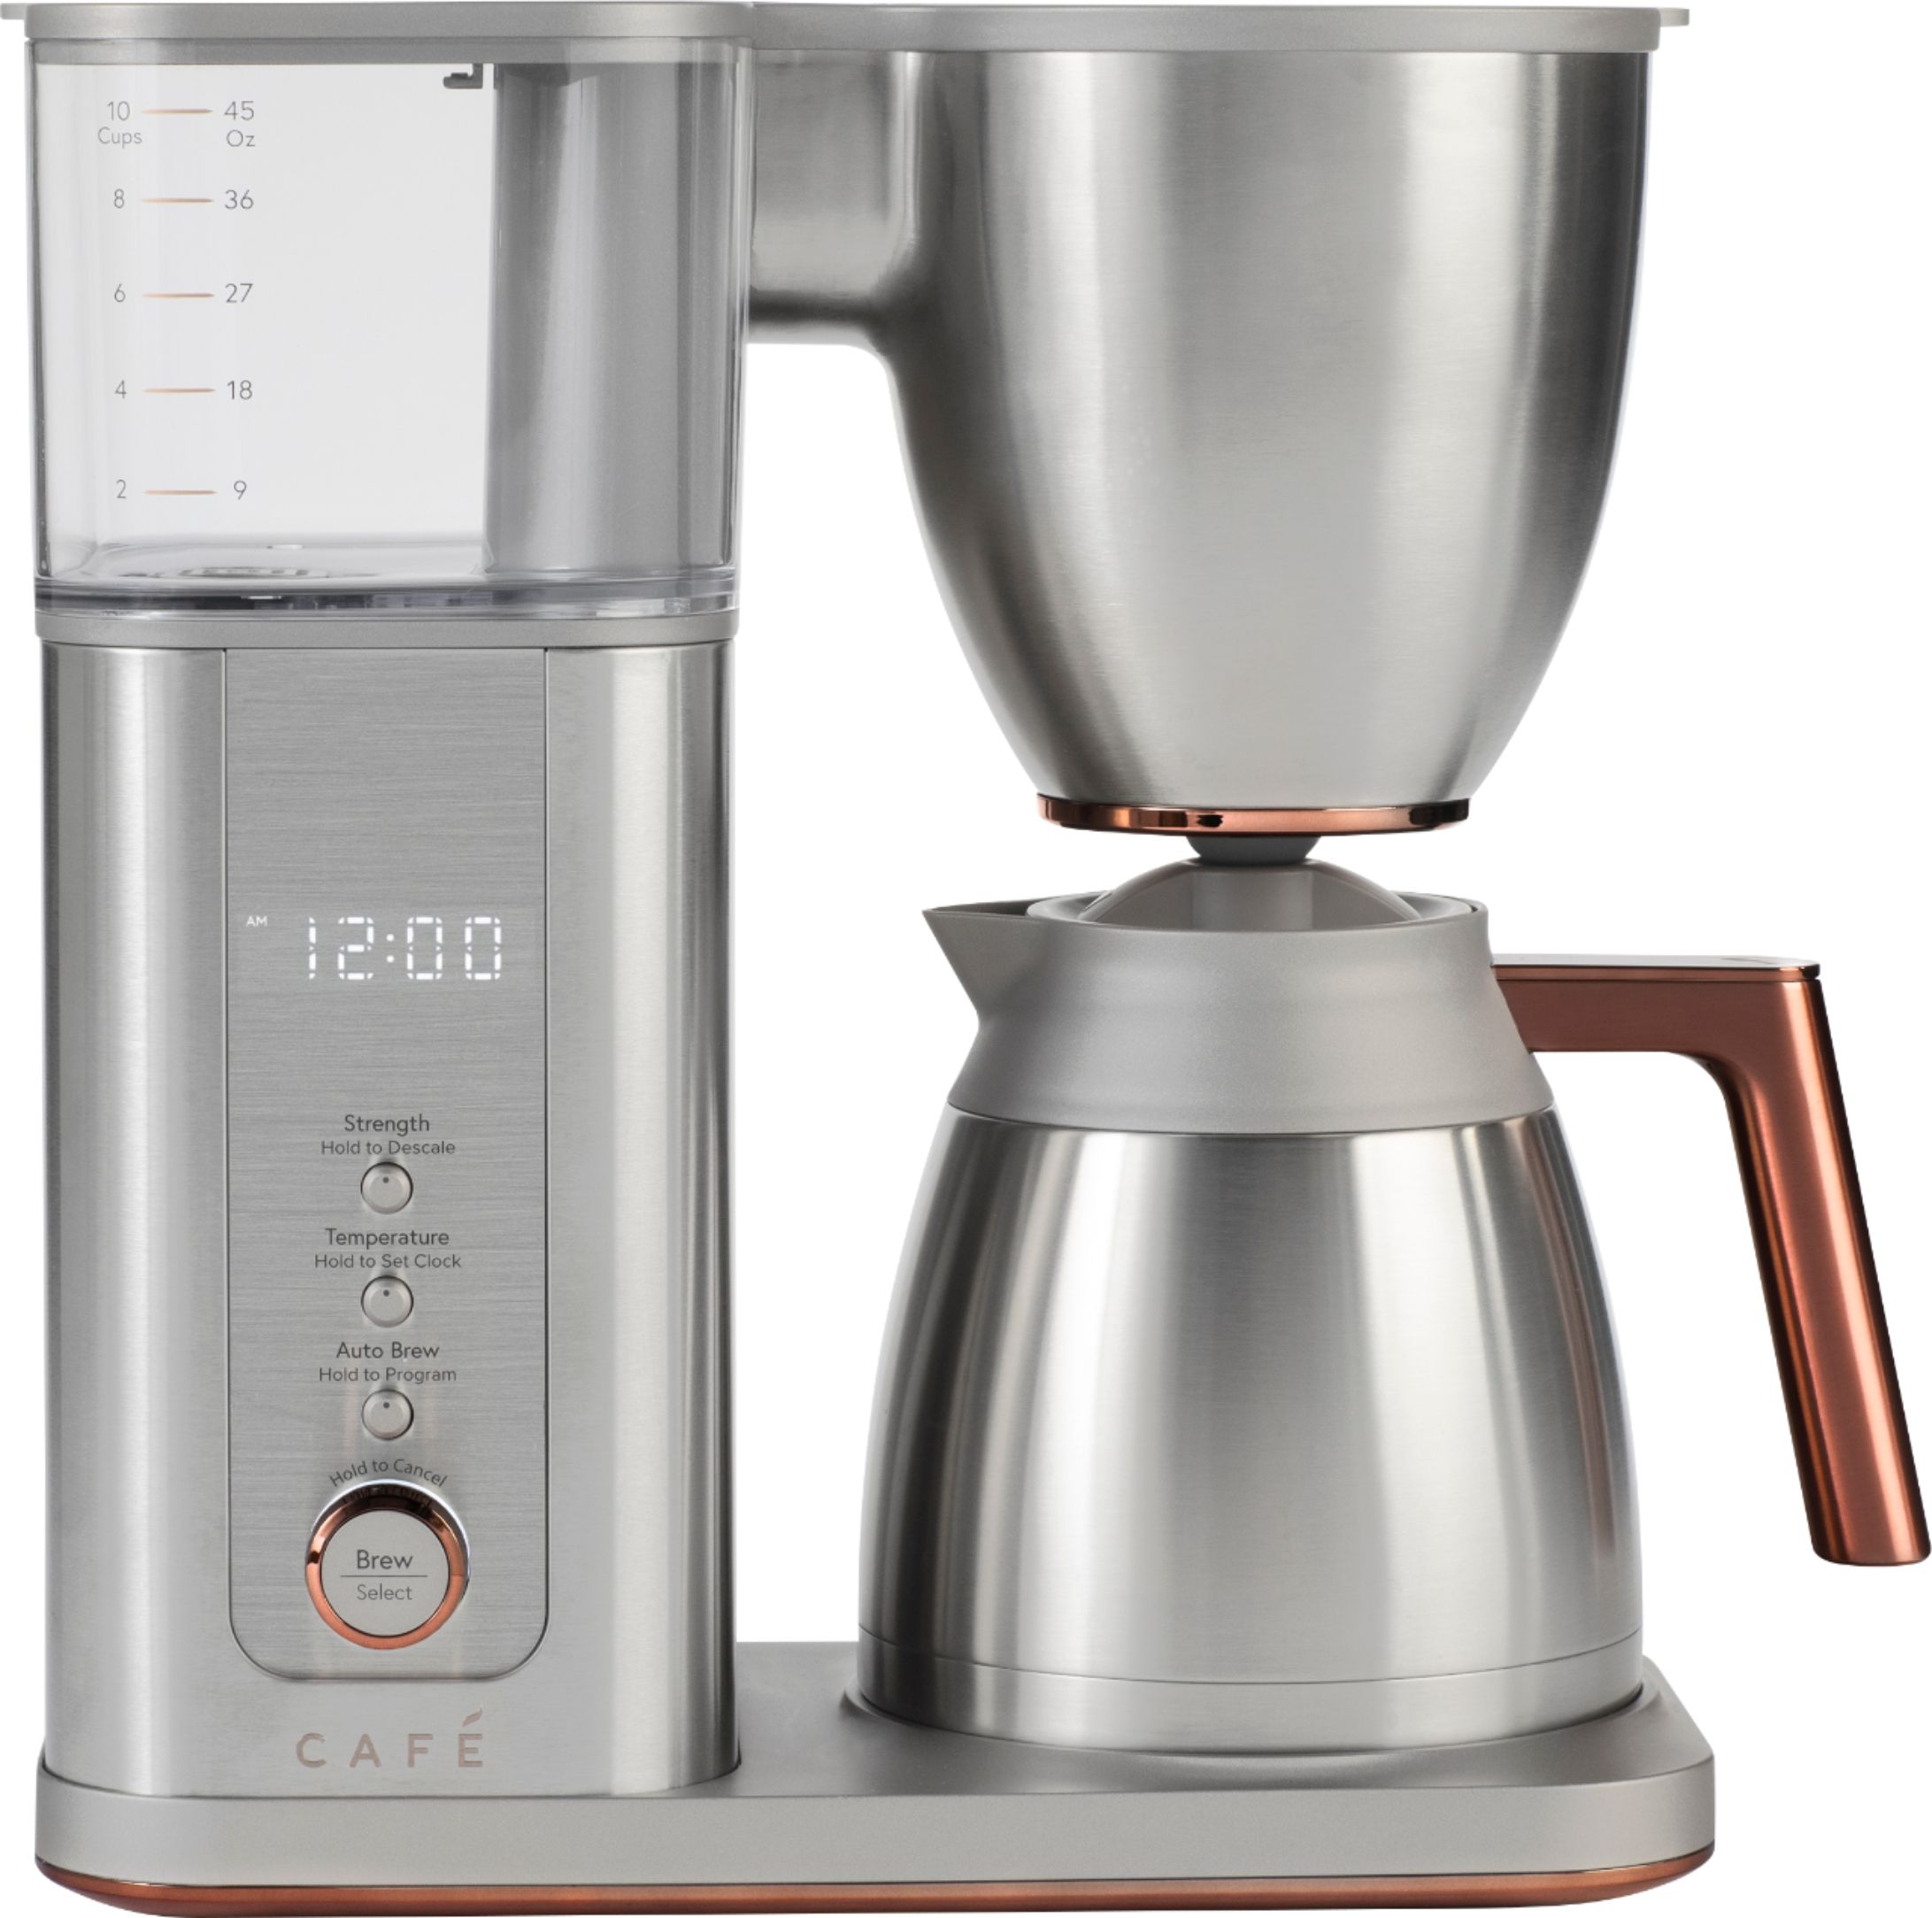 Save big on the Sboly Stainless Steel 10-Cup Drip Coffee Maker